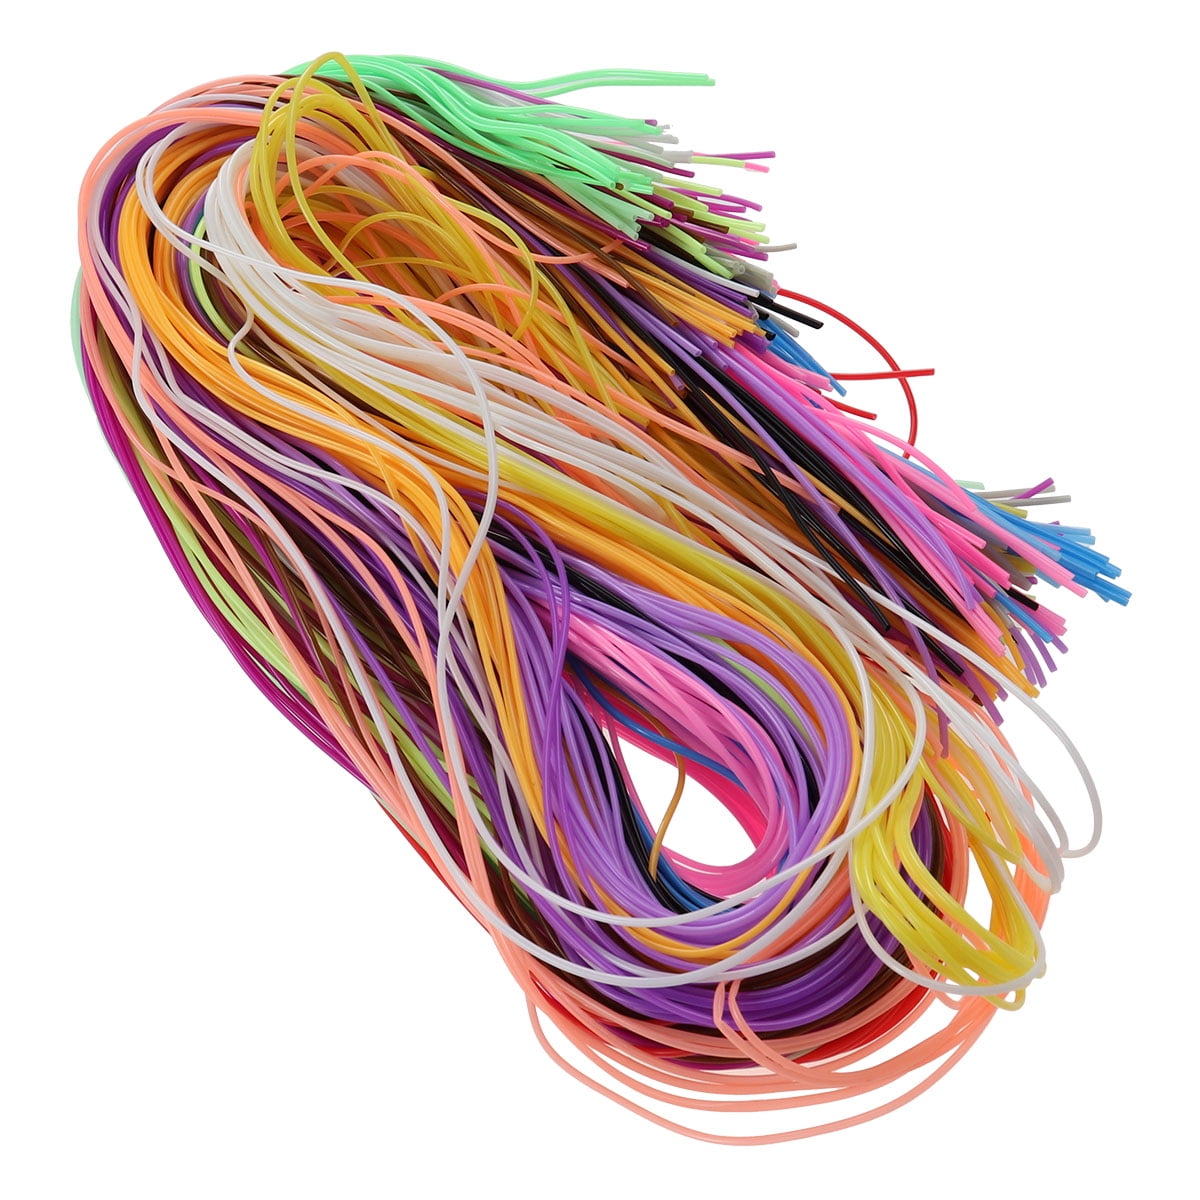 200pcs 20 colors Weaving Strings PVC Lacing String Craft String Multi-color  DIY Craft Cord Jewelry Making Rope